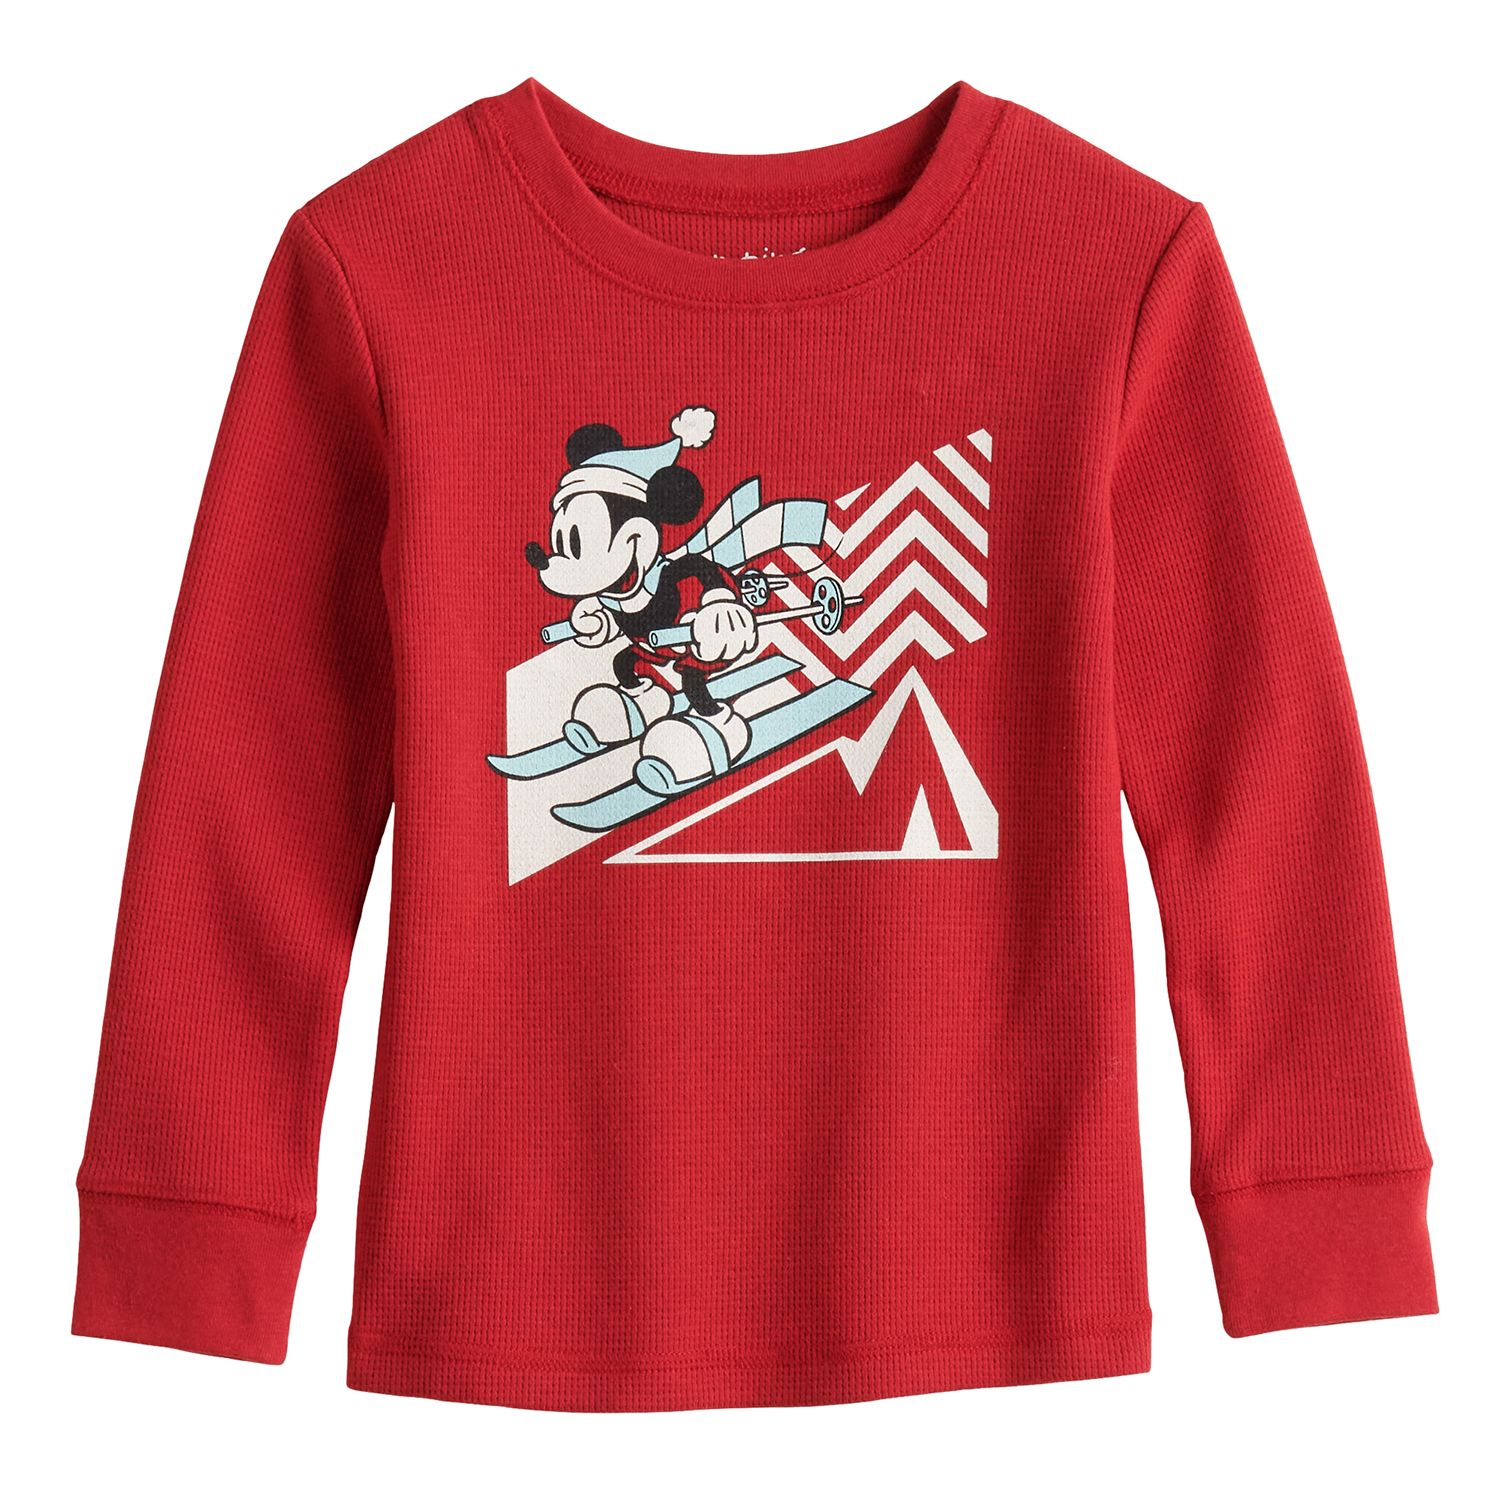 Image for Disney/Jumping Beans Disney's Mickey Mouse Toddler Boy Thermal Tee by Jumping Beans® at Kohl's.